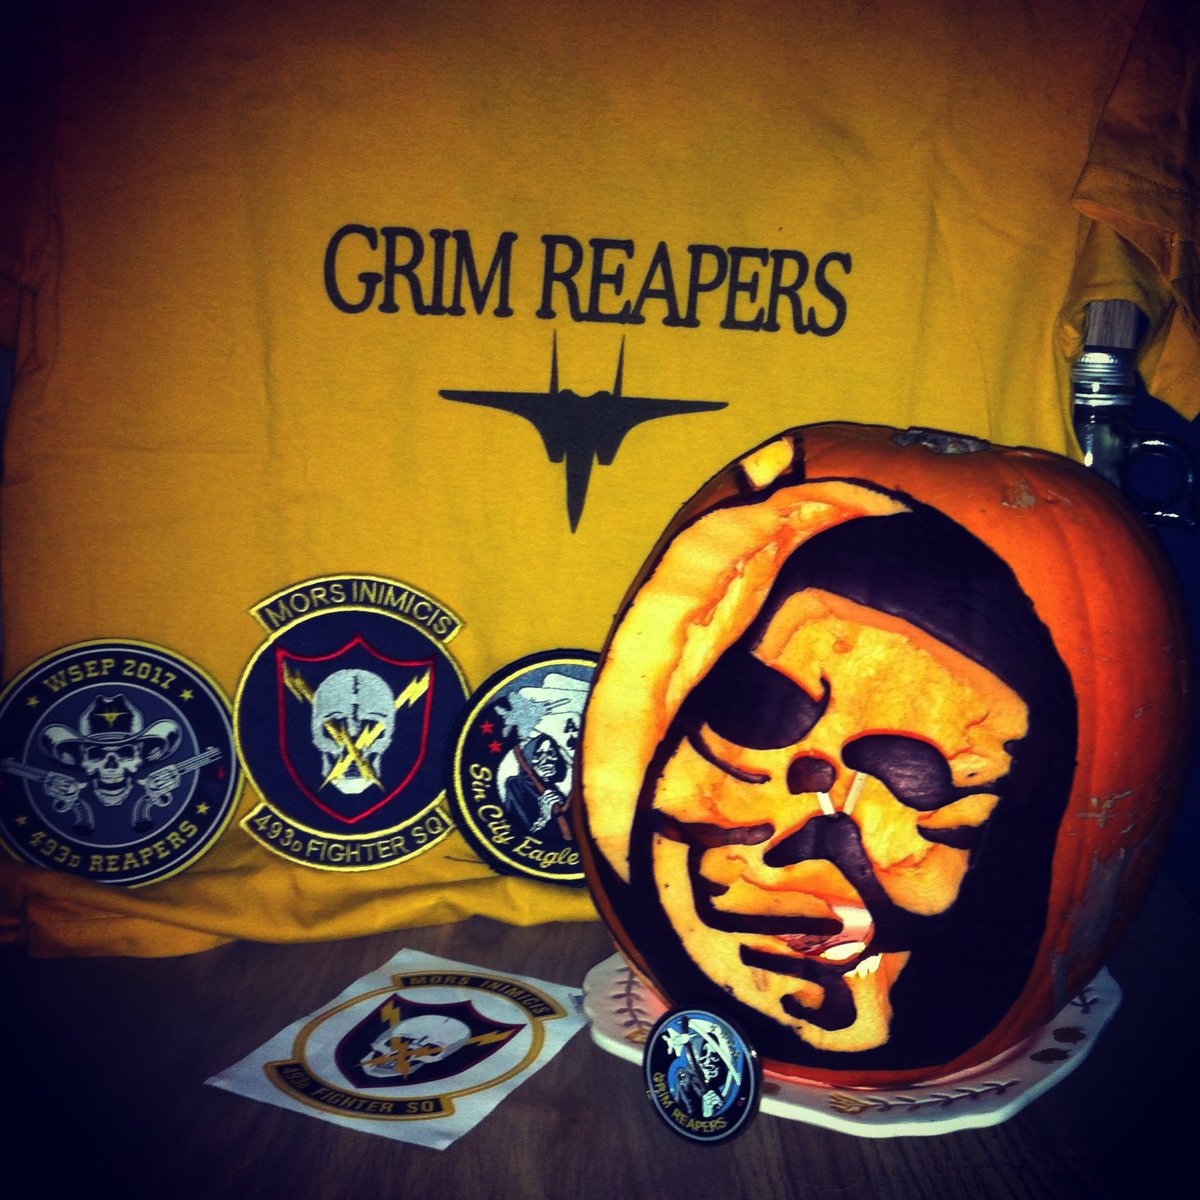 My attempt at the 493rd FS Grim Reaper for my Pumpkin... @48fighterwing @usairforce #WeAreLiberty #RAFLakenheath #493rdgrimreapers #493rdFSGrimReapers #493rdfightersquadron #493rdFS #48fighterwing #48FW #Halloween #Pumpkin #GrimReaper #F15C #F15Eagle #F15CEagle #F15 #AVGeek